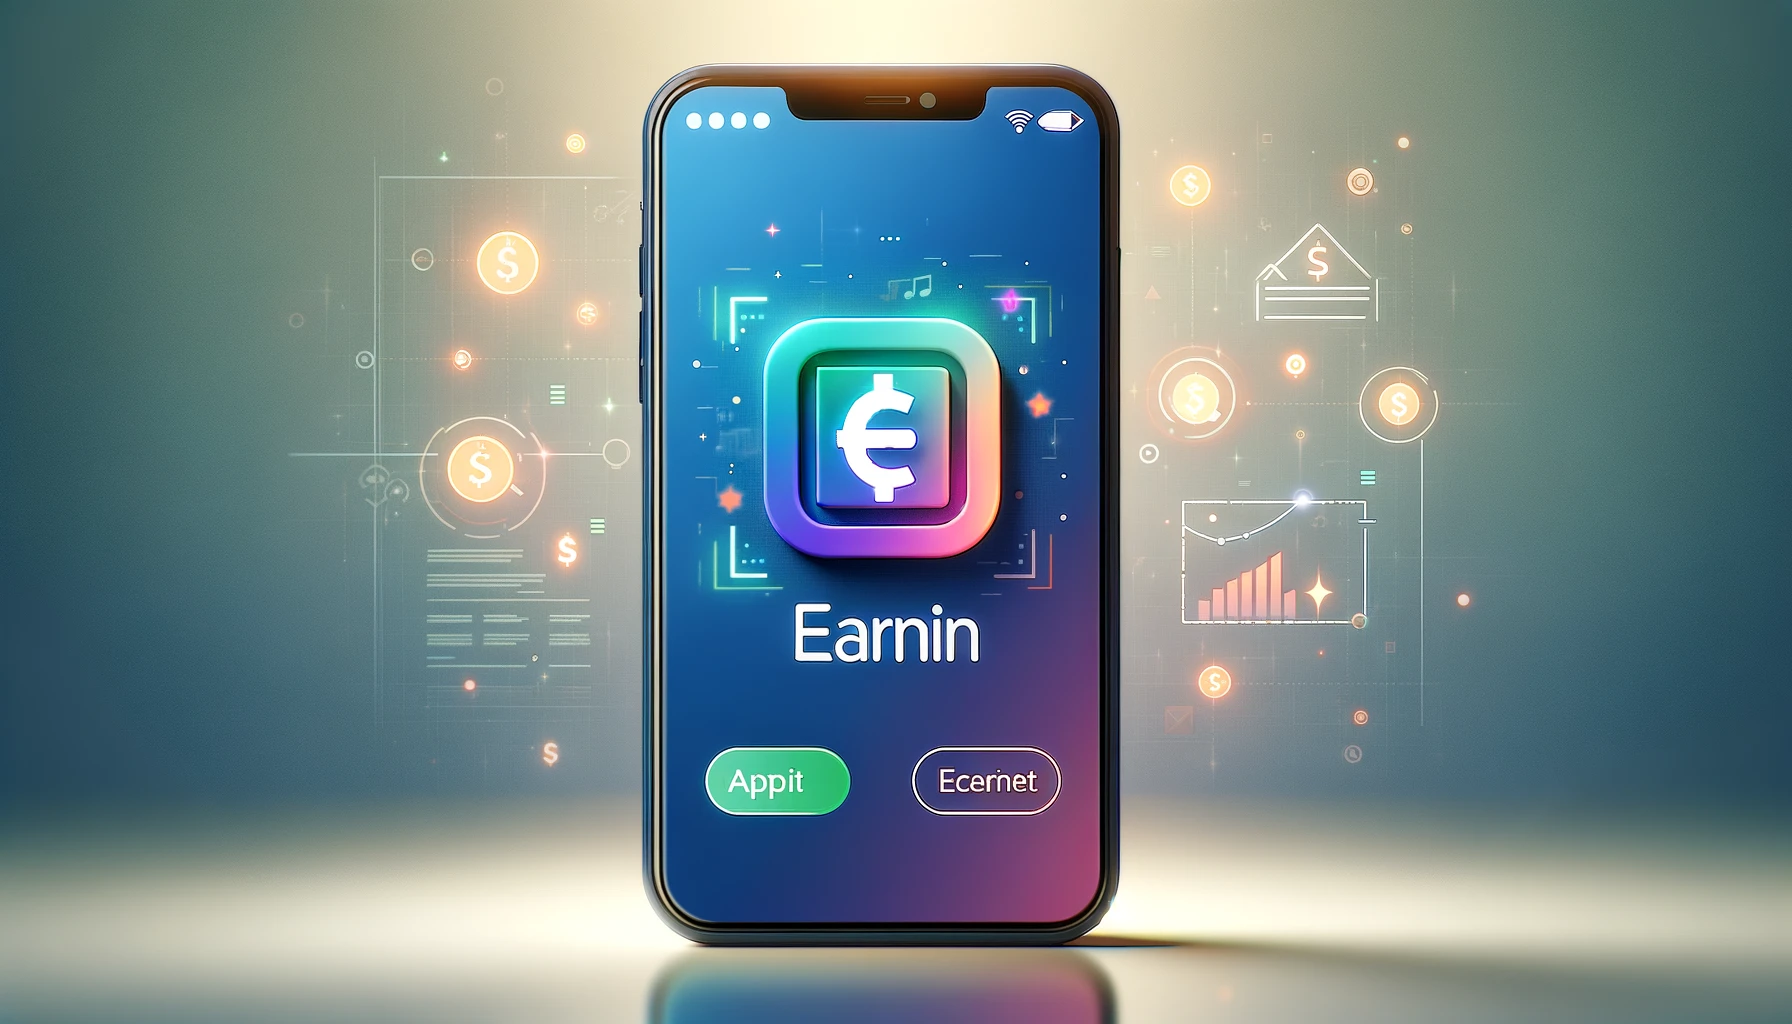 A screenshot of the Earnin app icon, one of the popular apps like Earnin for cash advance services.